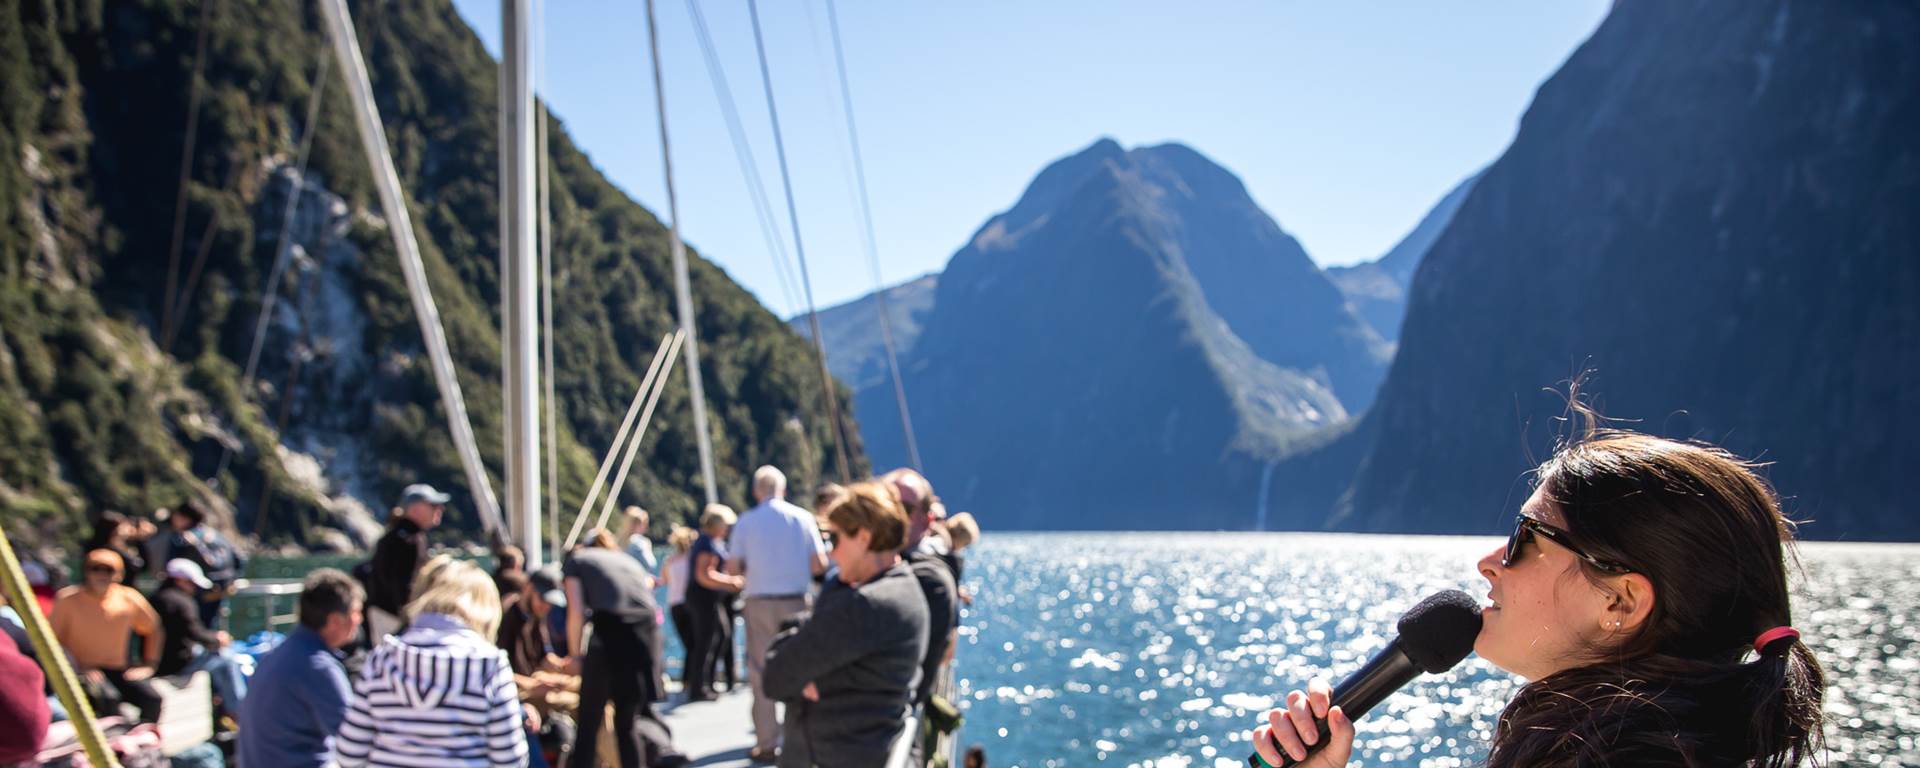 Commentary onboard boat in Milford Sound